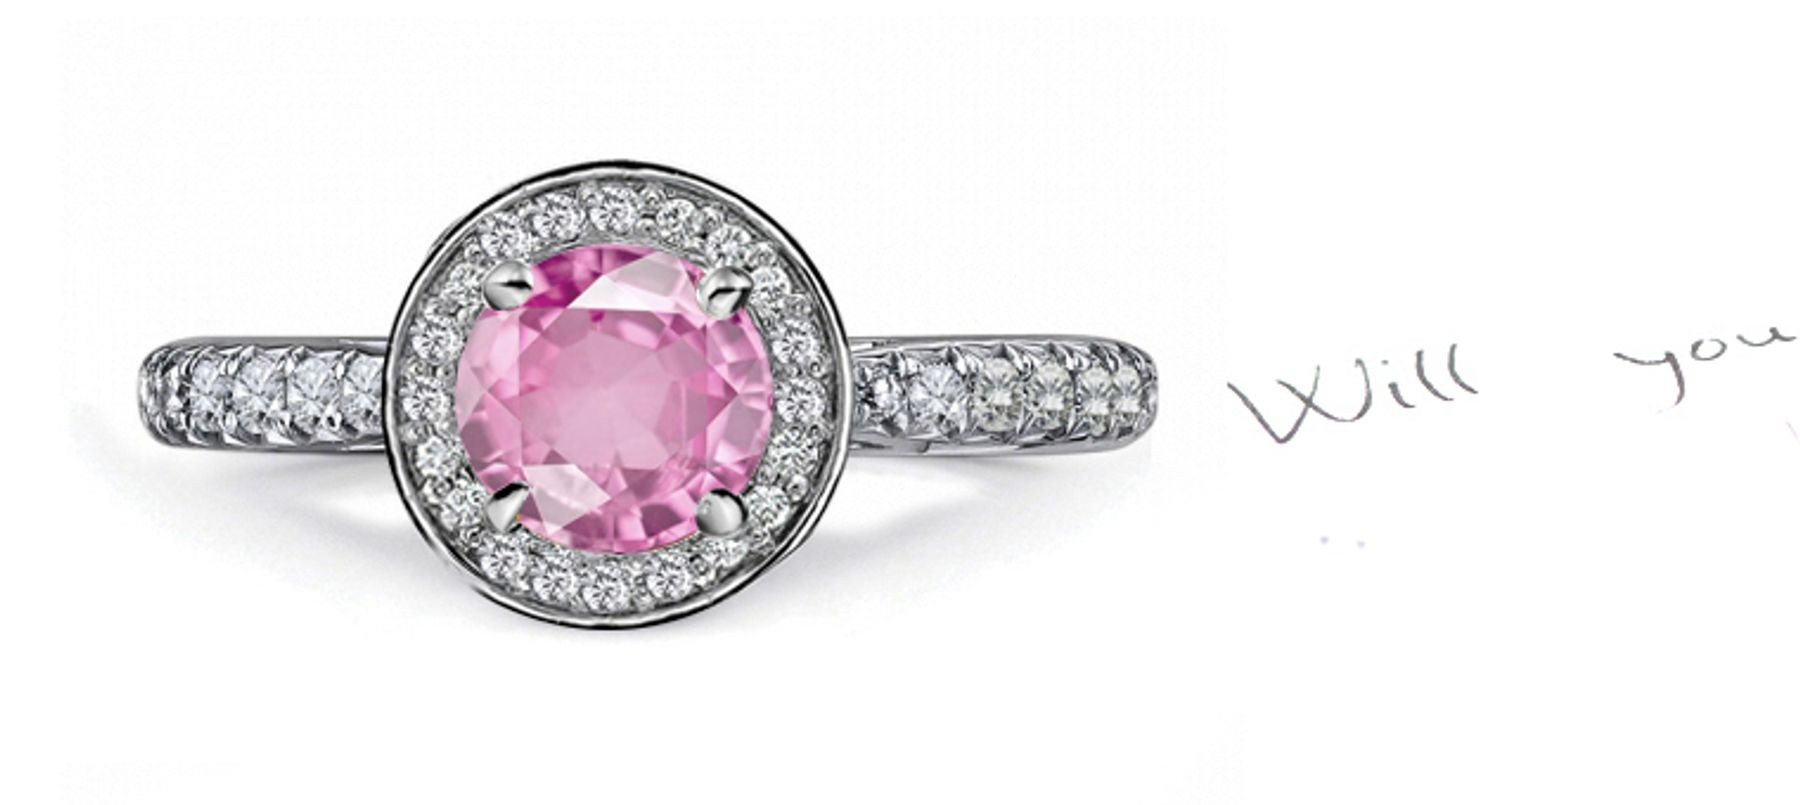 Art Deco Fine Pink Round Natural Sapphire & Pure White Diamond Bauble Artfully Sculpted Ring in 14k Gold